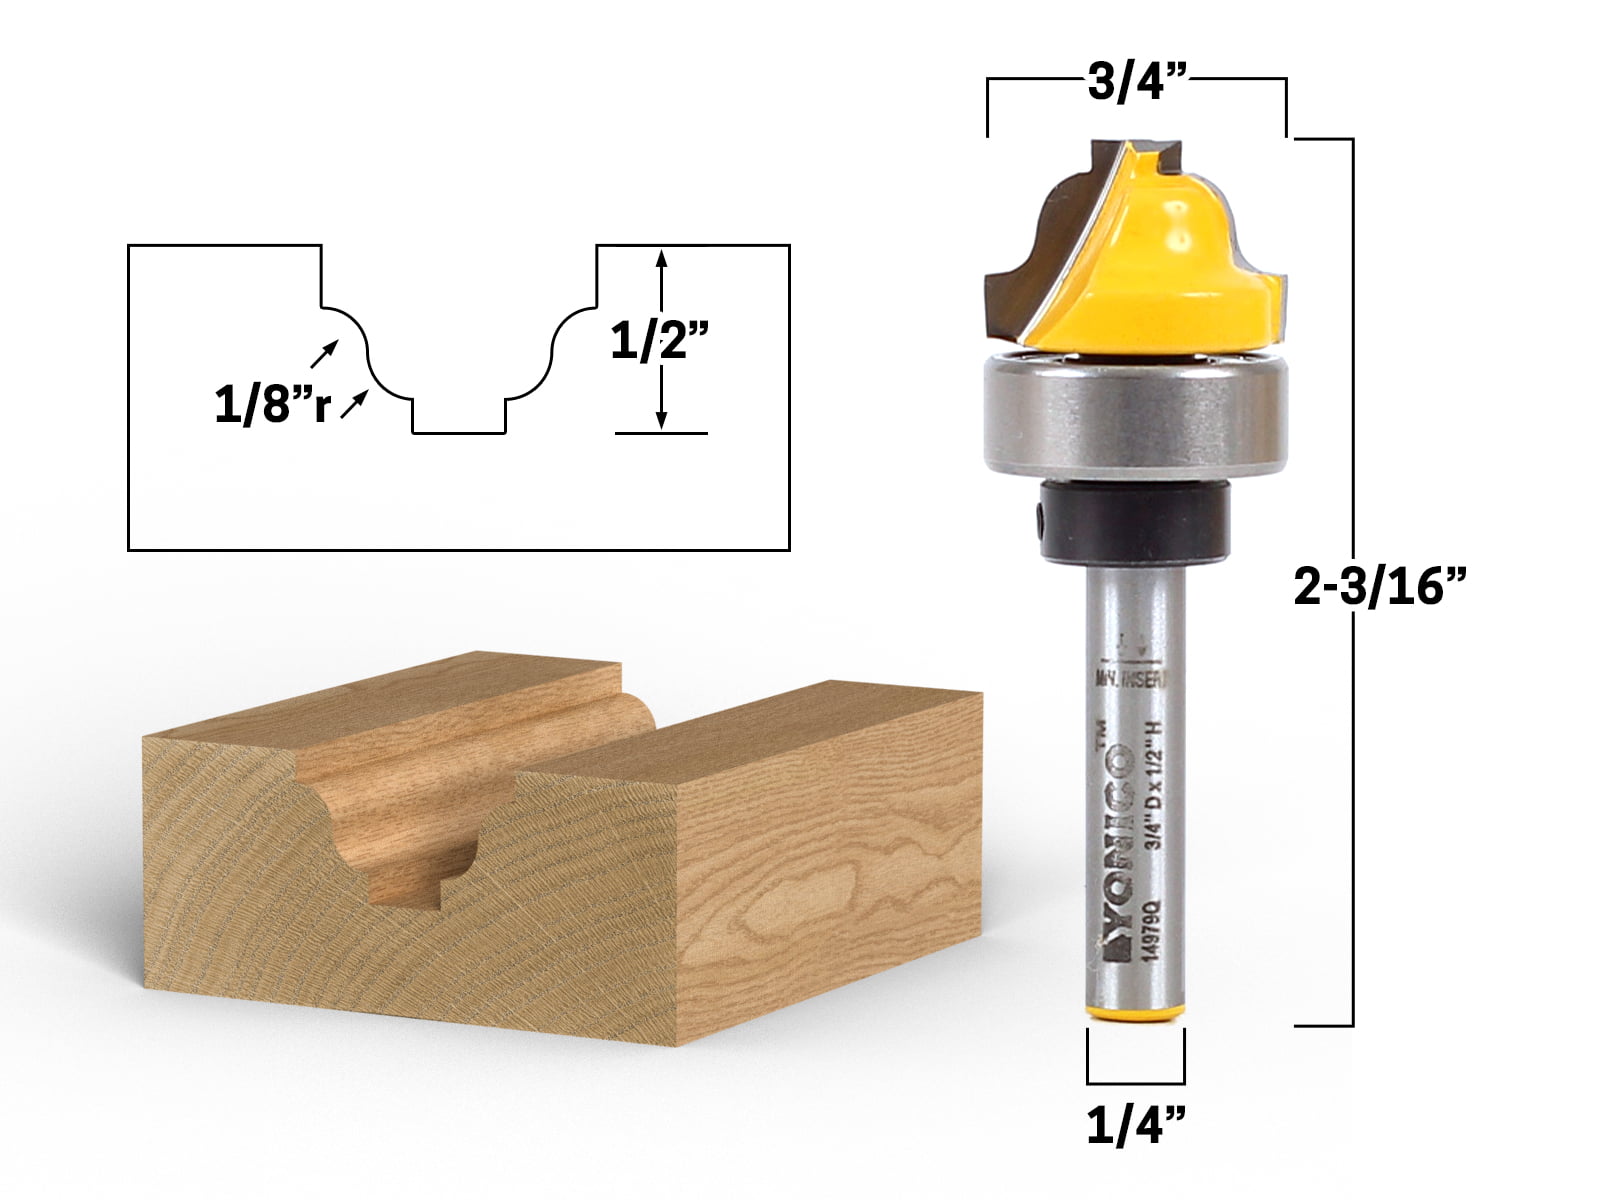 uxcell 7/8-inch Cutting Dia 1/4-inch Steel Shank Carbide Tipped Cove Core Box Router Bit 